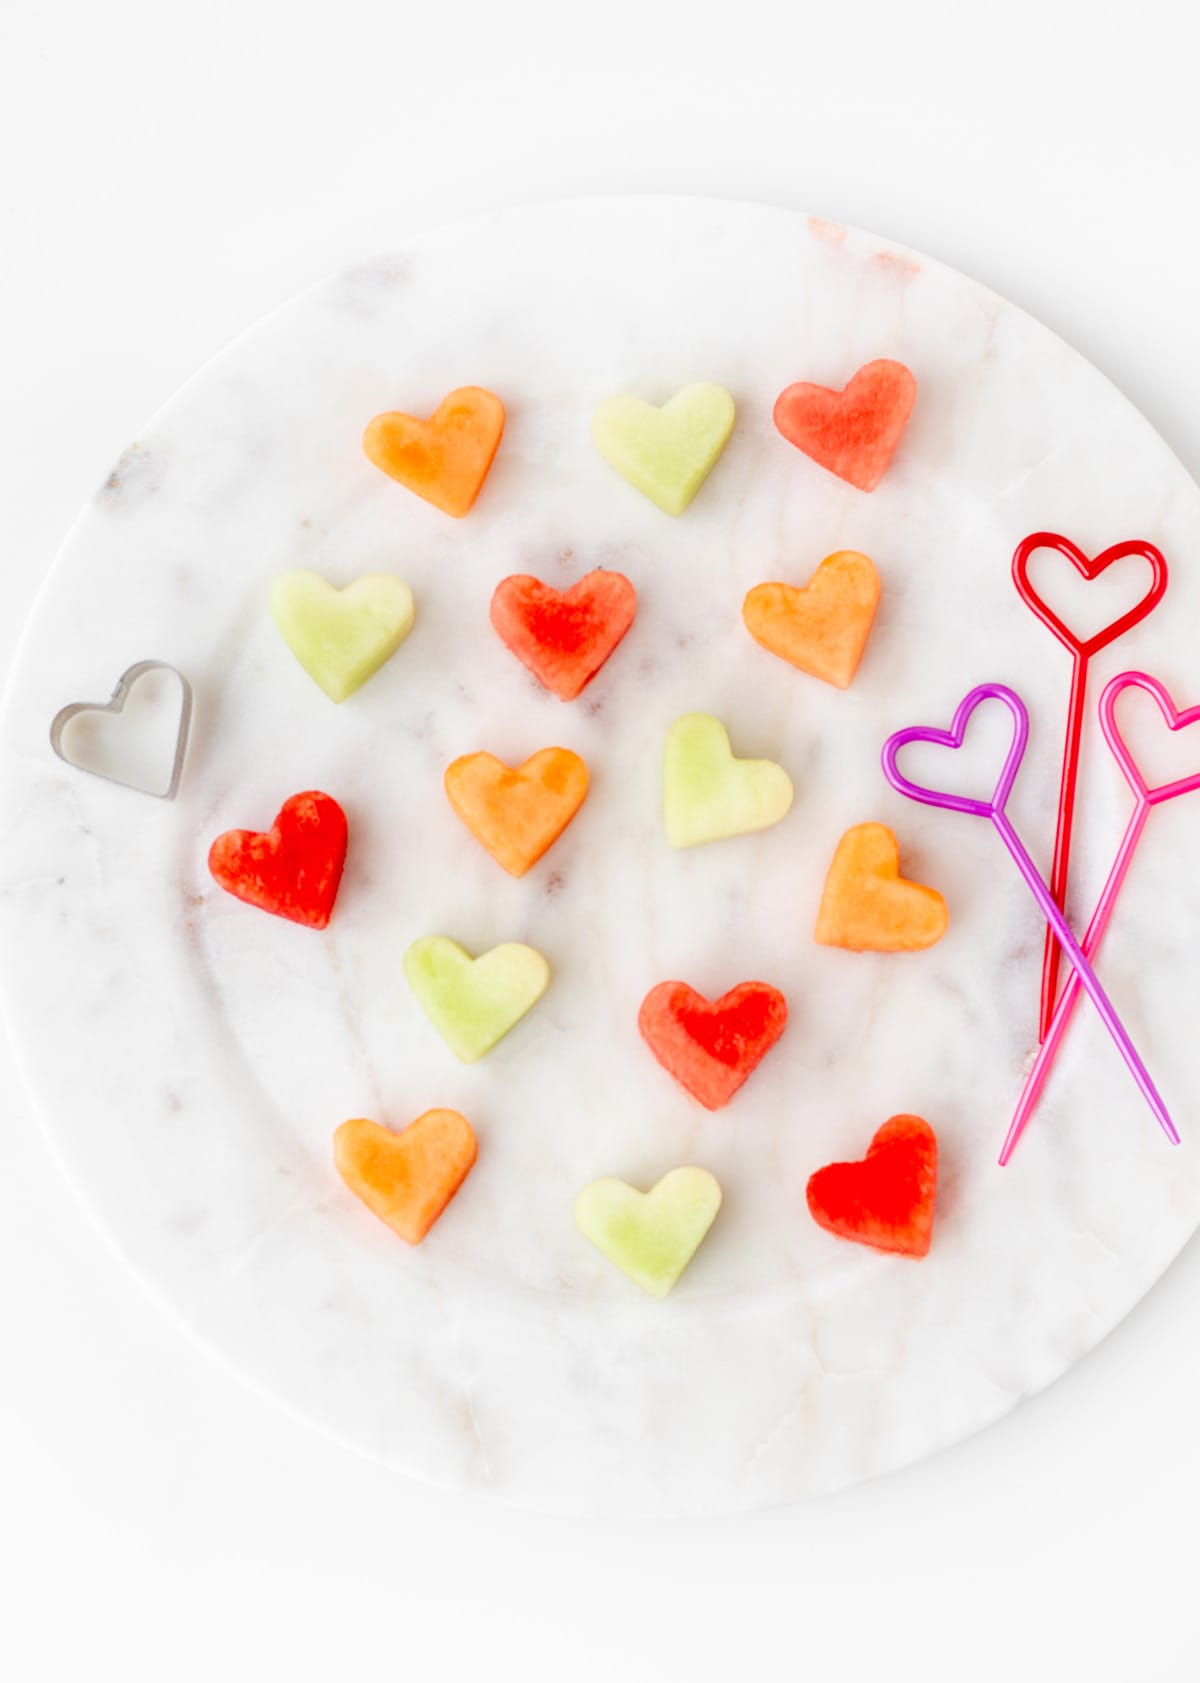 Various heart shaped fruit on a decorative plate, with the heart skewers and heart shaped cookie cutter on the side.